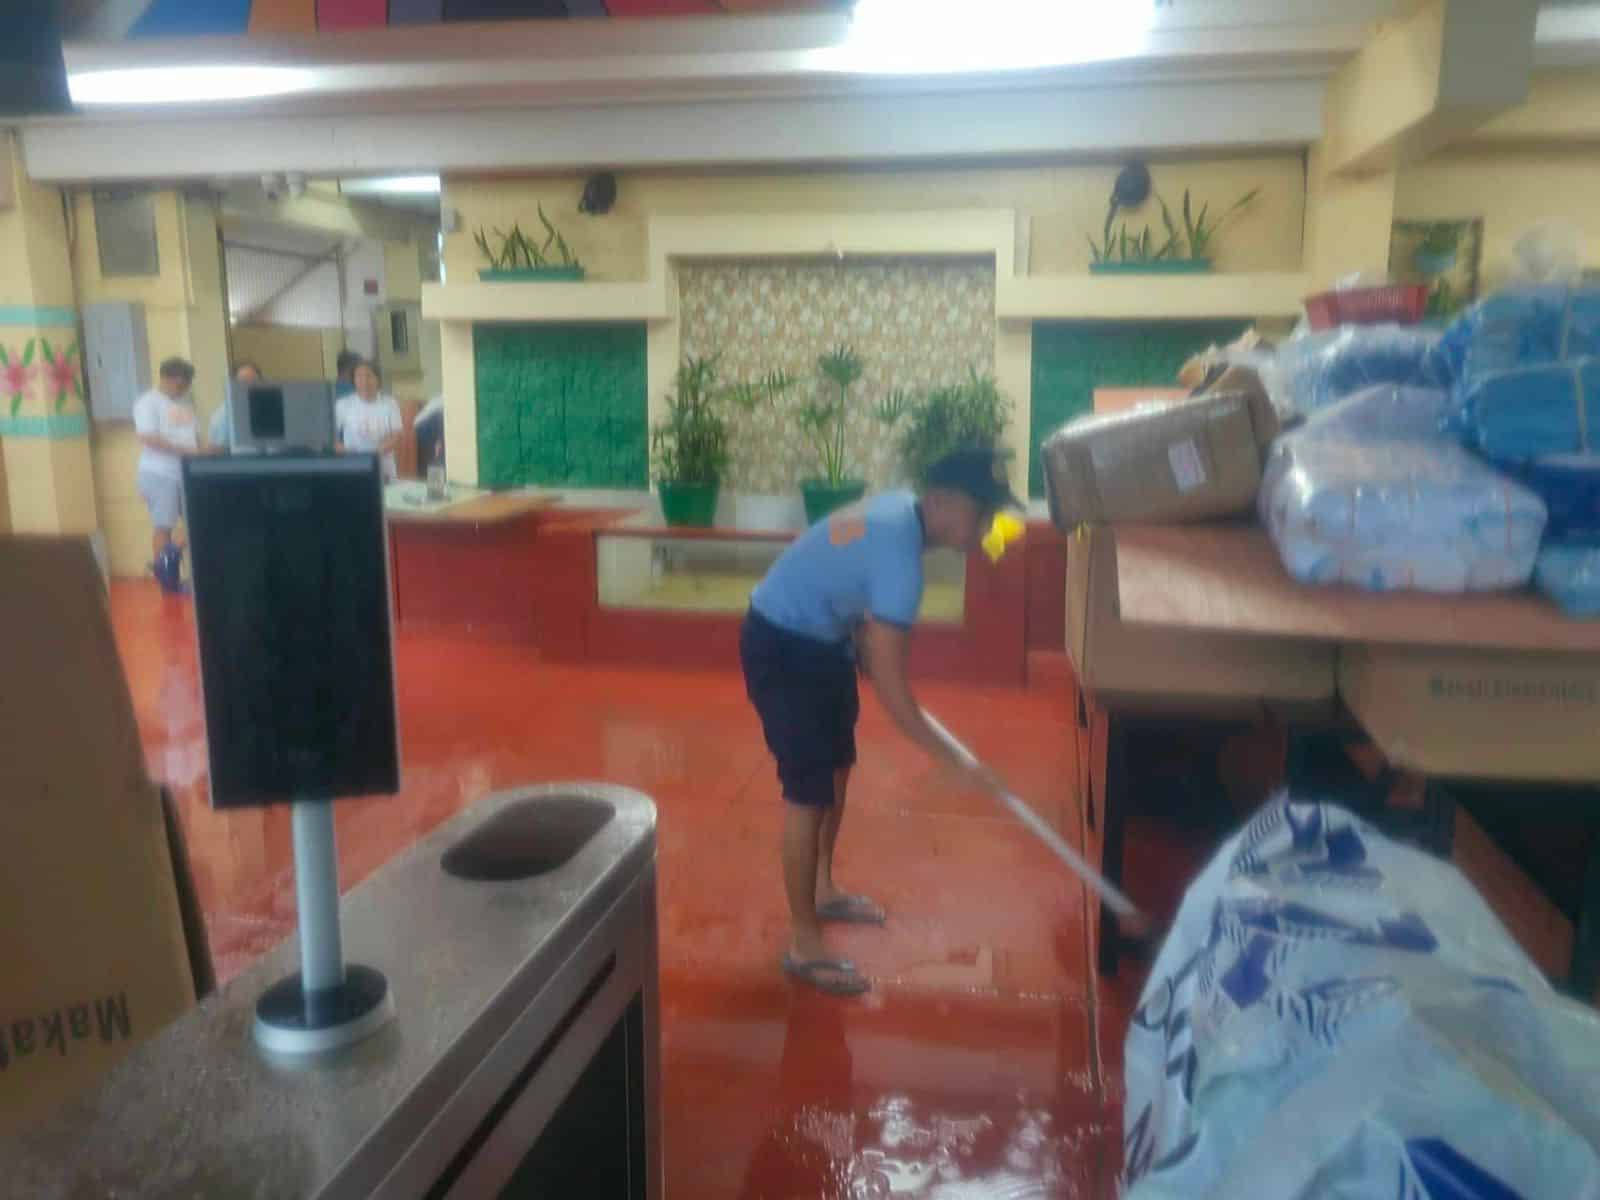 Authorities offered assistance to a flooded elementary school in Makati City on Wednesday morning, according to Makati police. carina